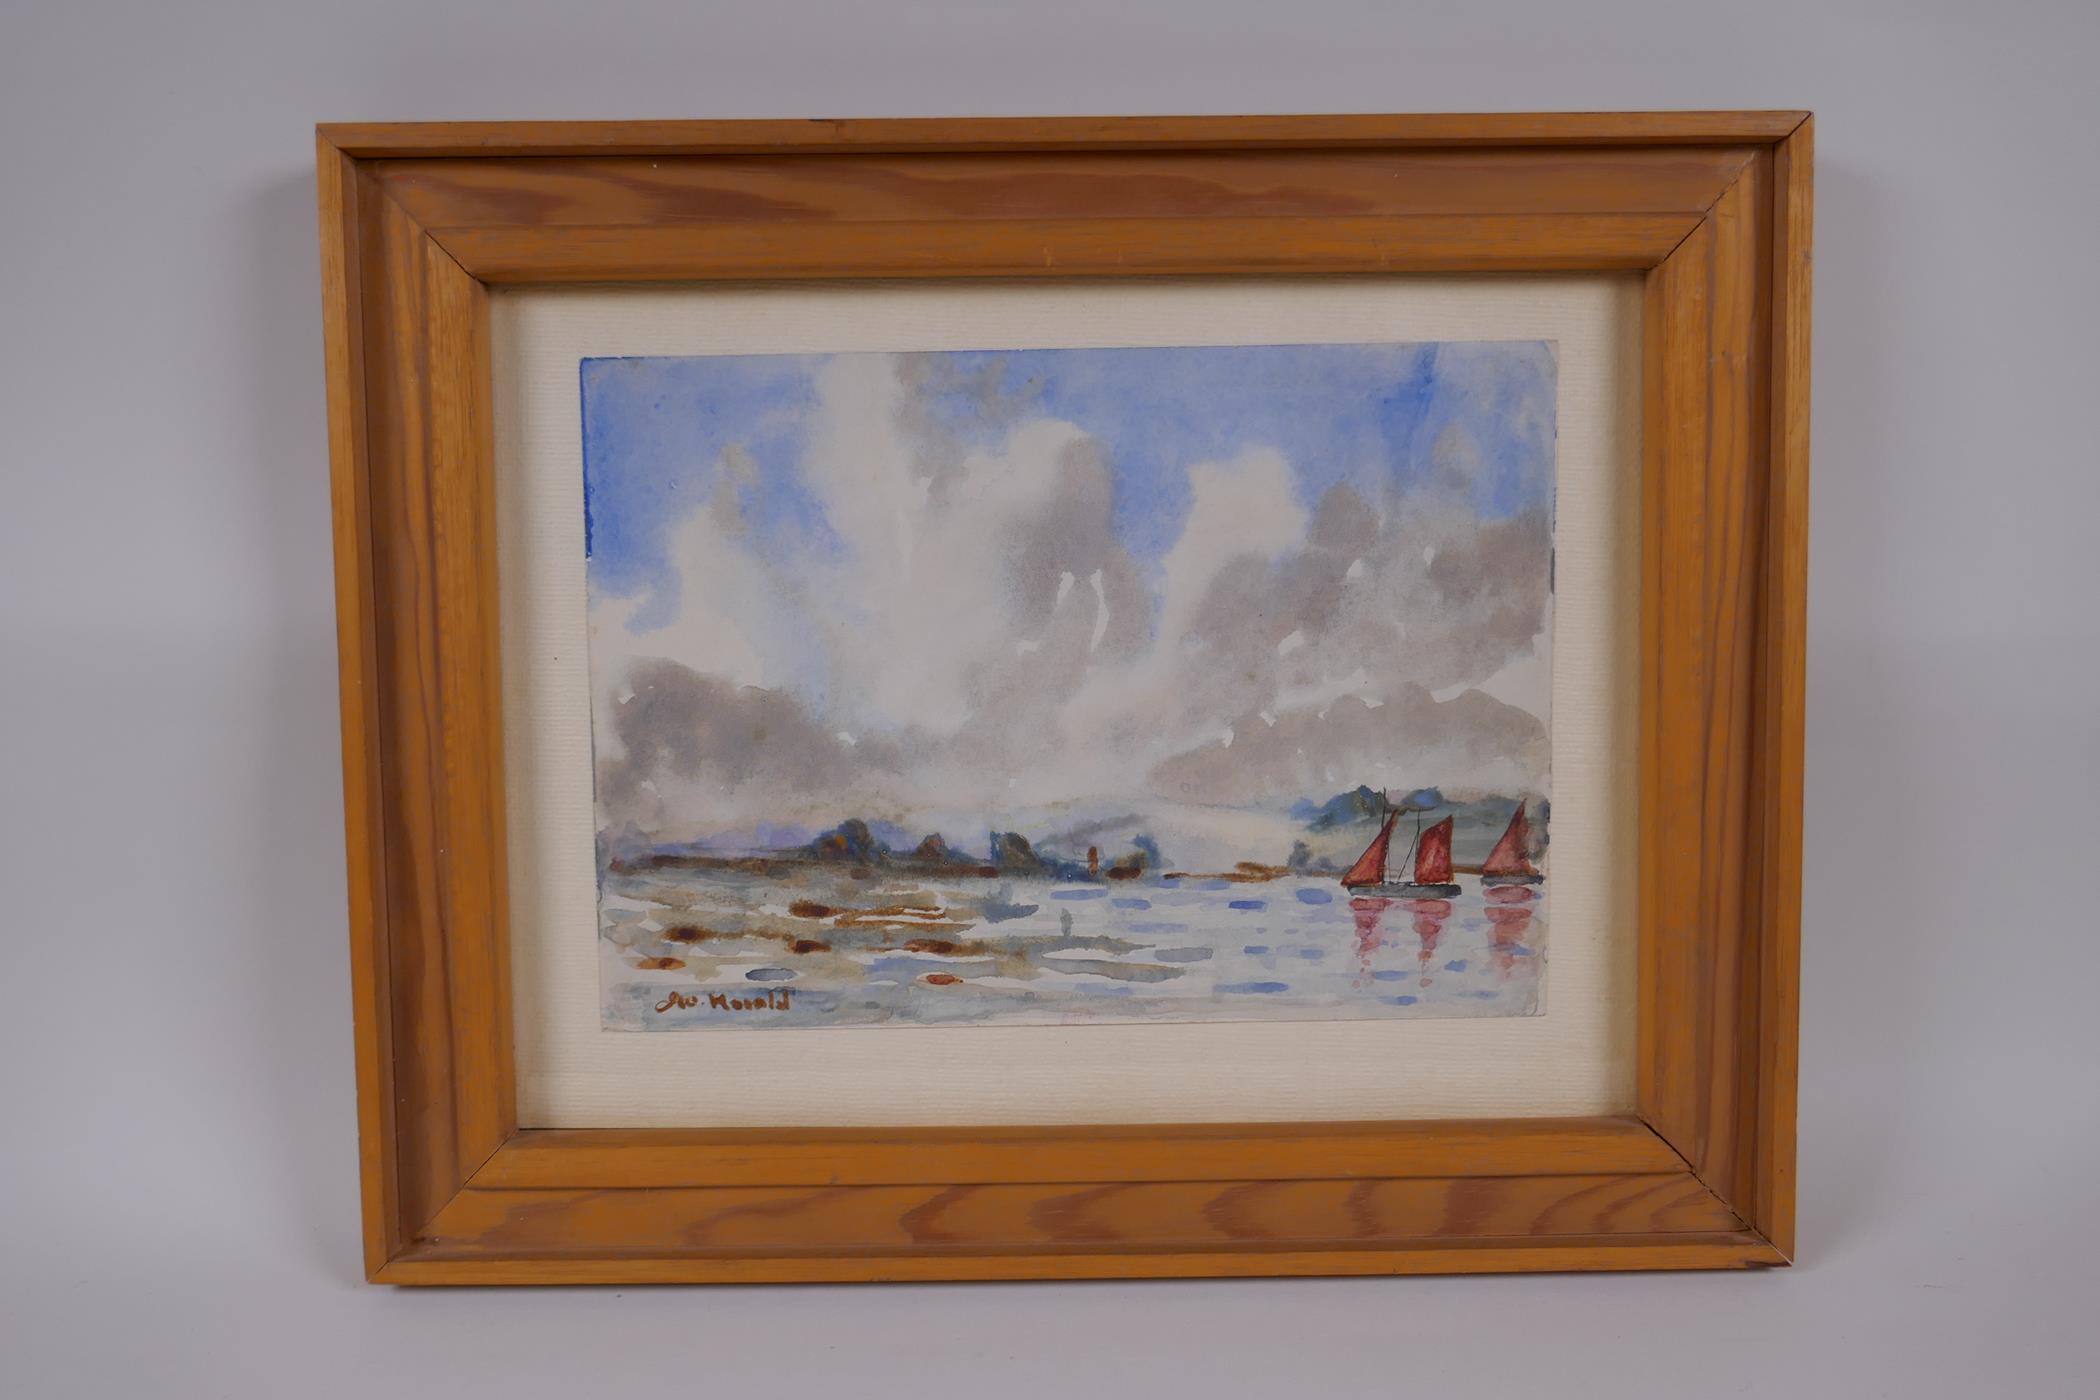 Watercolour sketch of boats in a coastal inlet, signed J.W. Herald, 18 x 25cm - Image 2 of 3